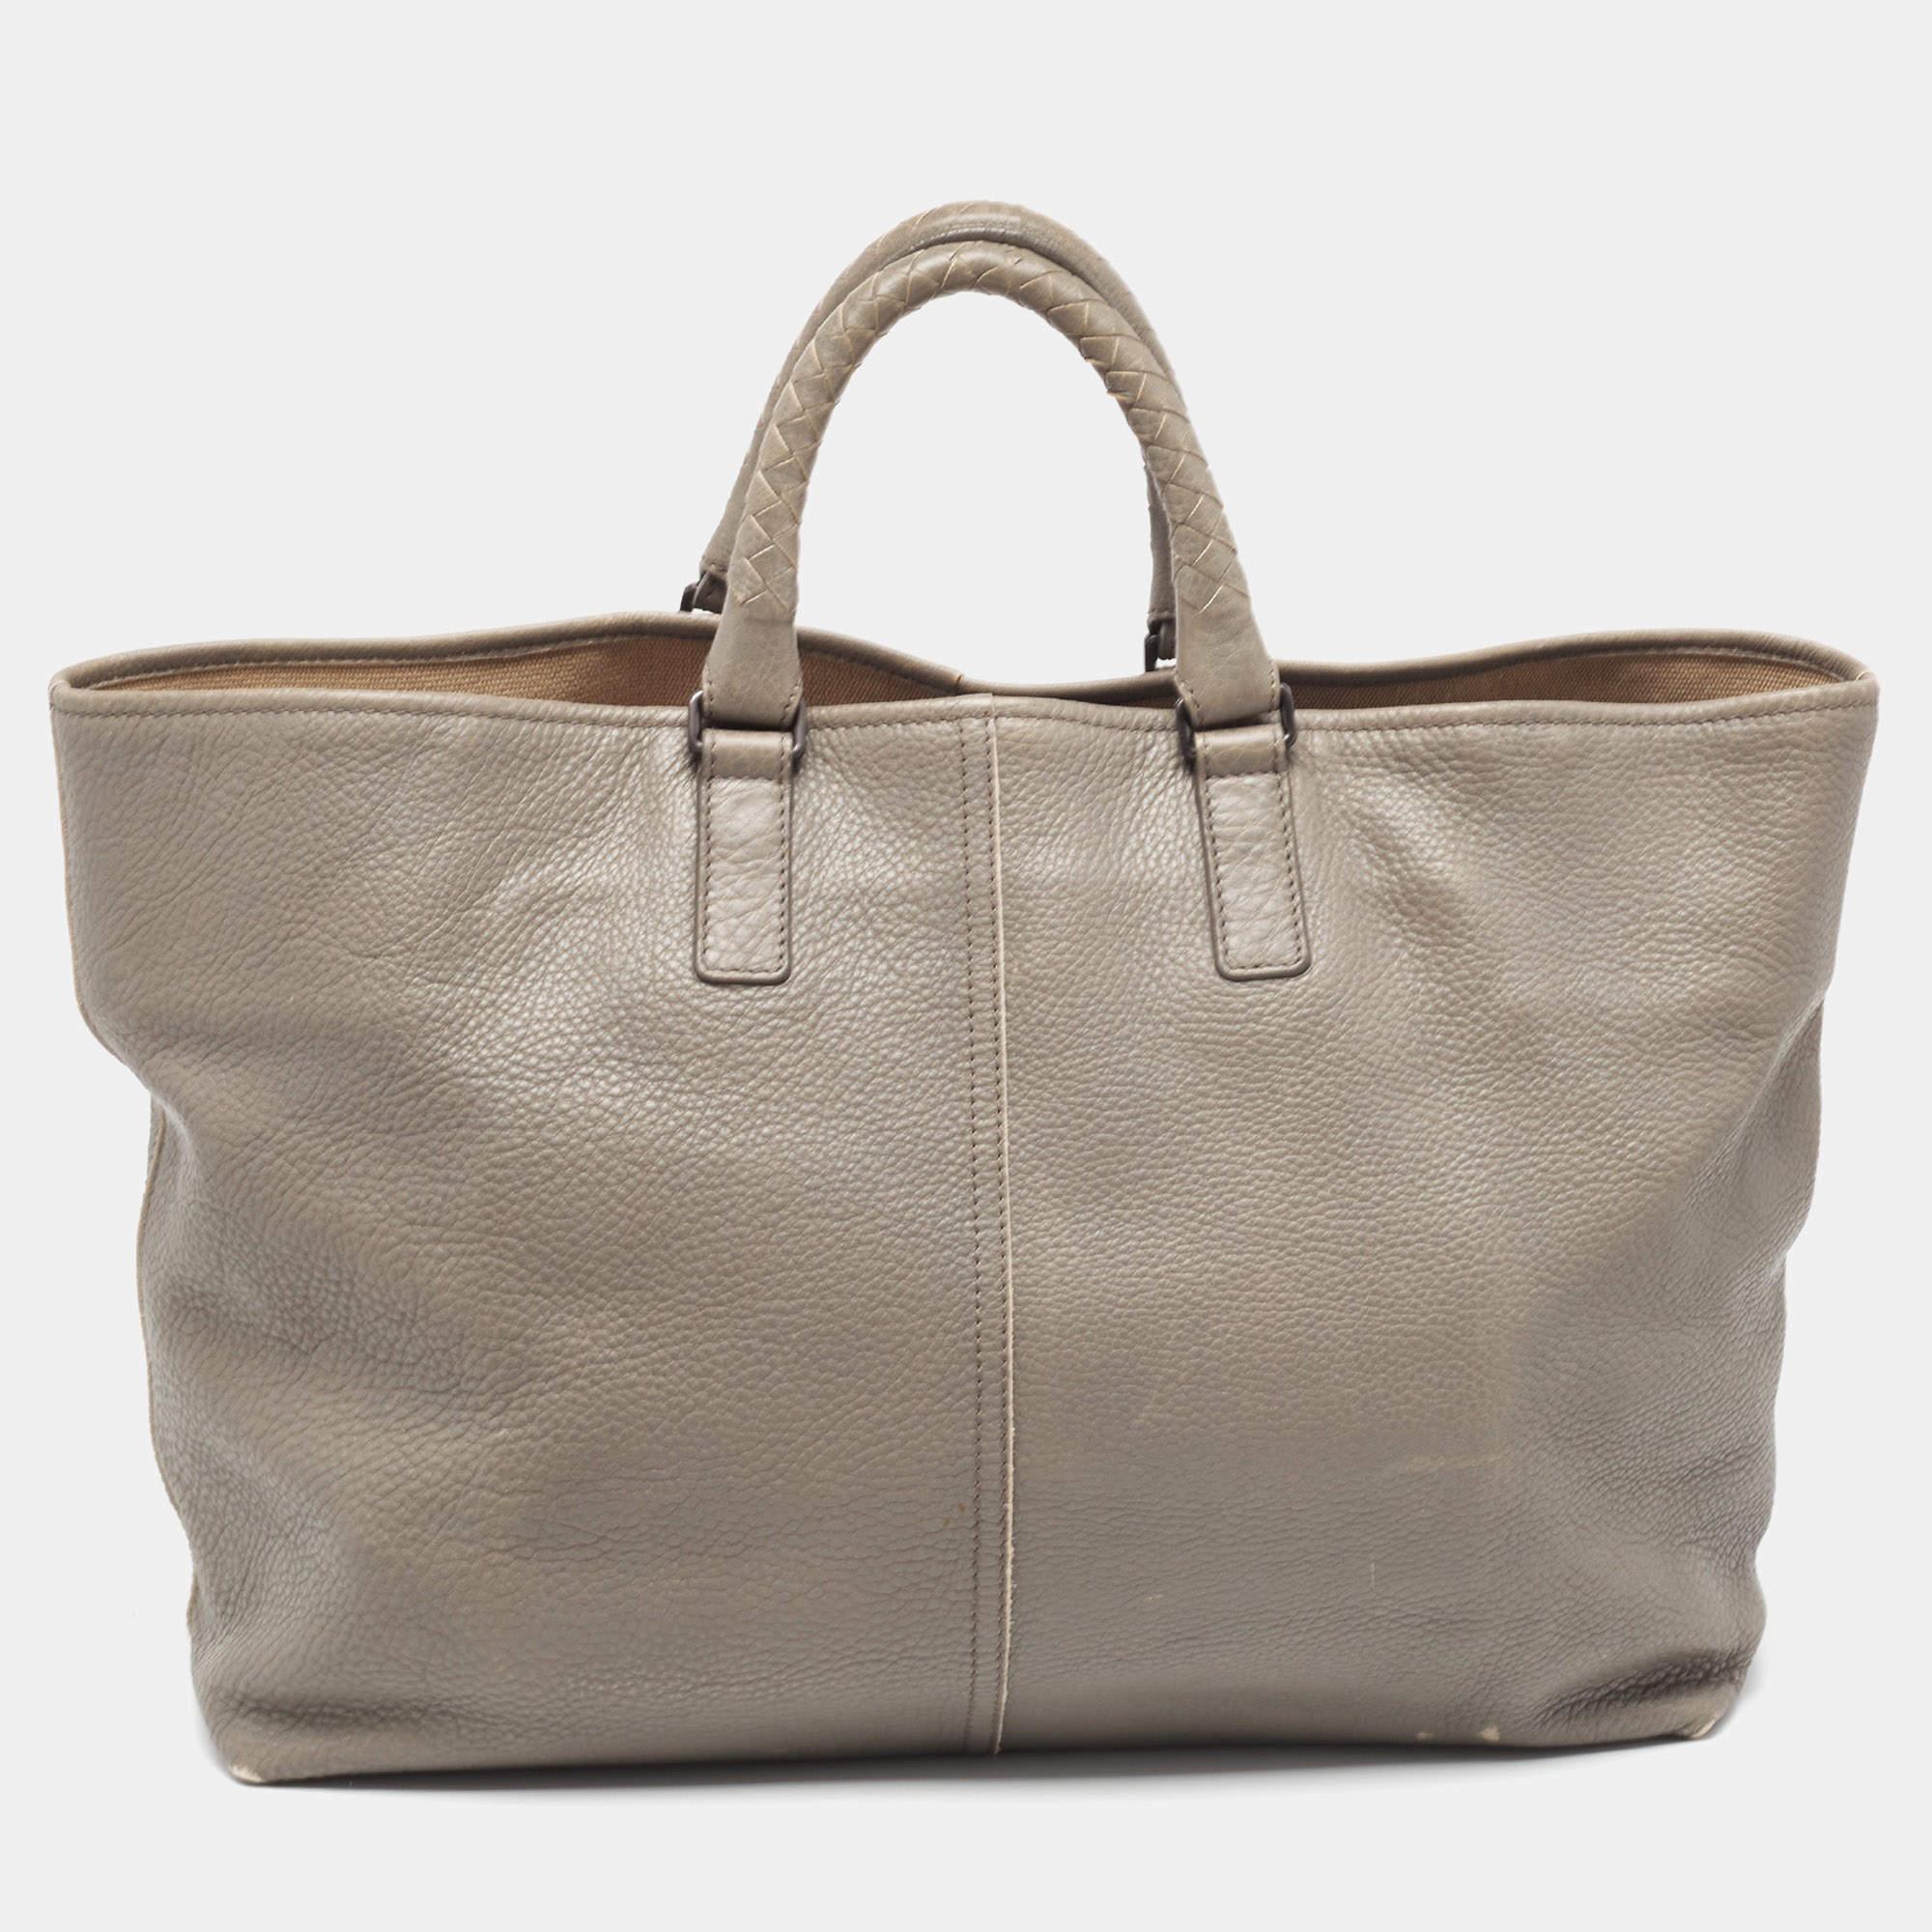 Thoughtful details, high quality, and everyday convenience mark this Bottega Veneta Intrecciato bag for women. The bag is sewn with skill to deliver a refined look and an impeccable finish.

